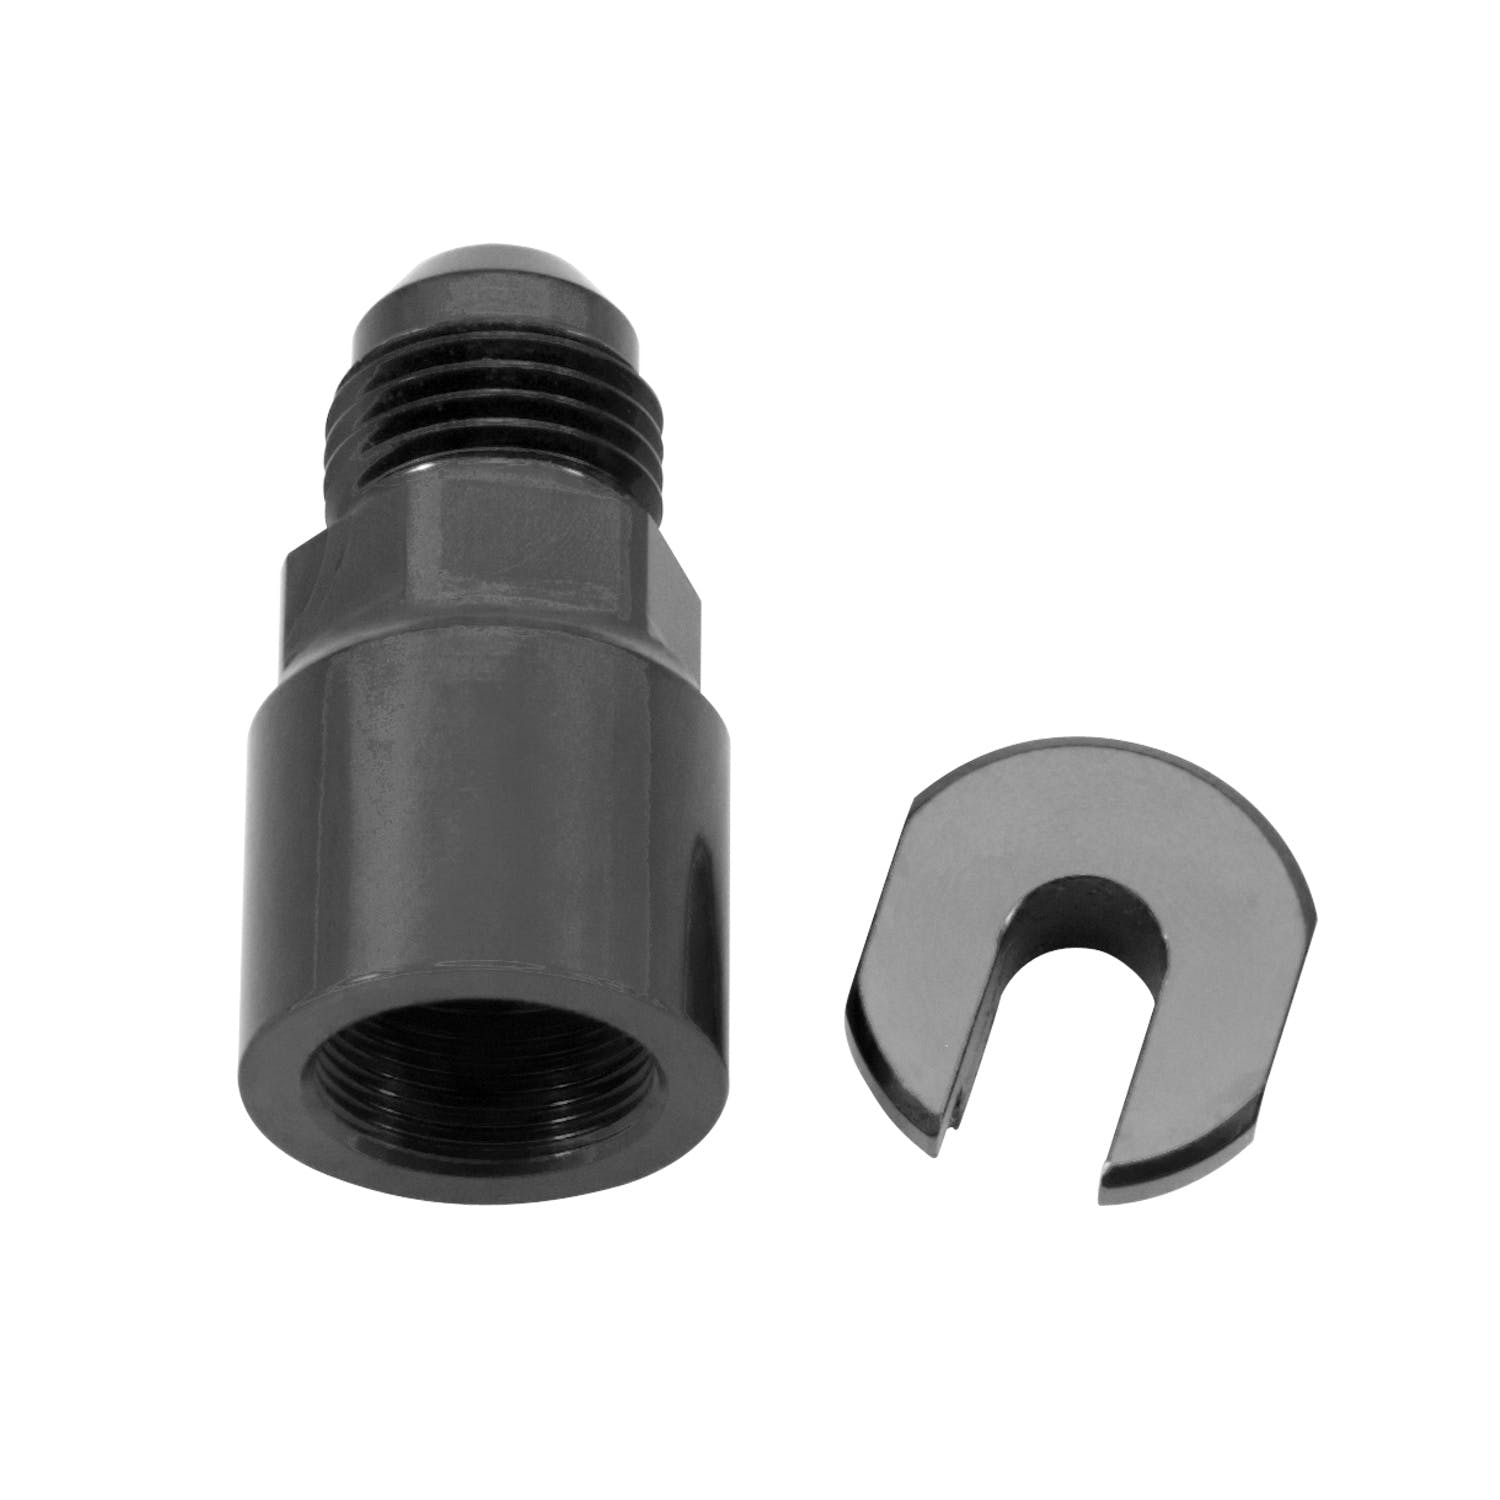 Russell 641303 EFI fuel fitting; 6-AN male to 1/4 inch female quick connect; black finish